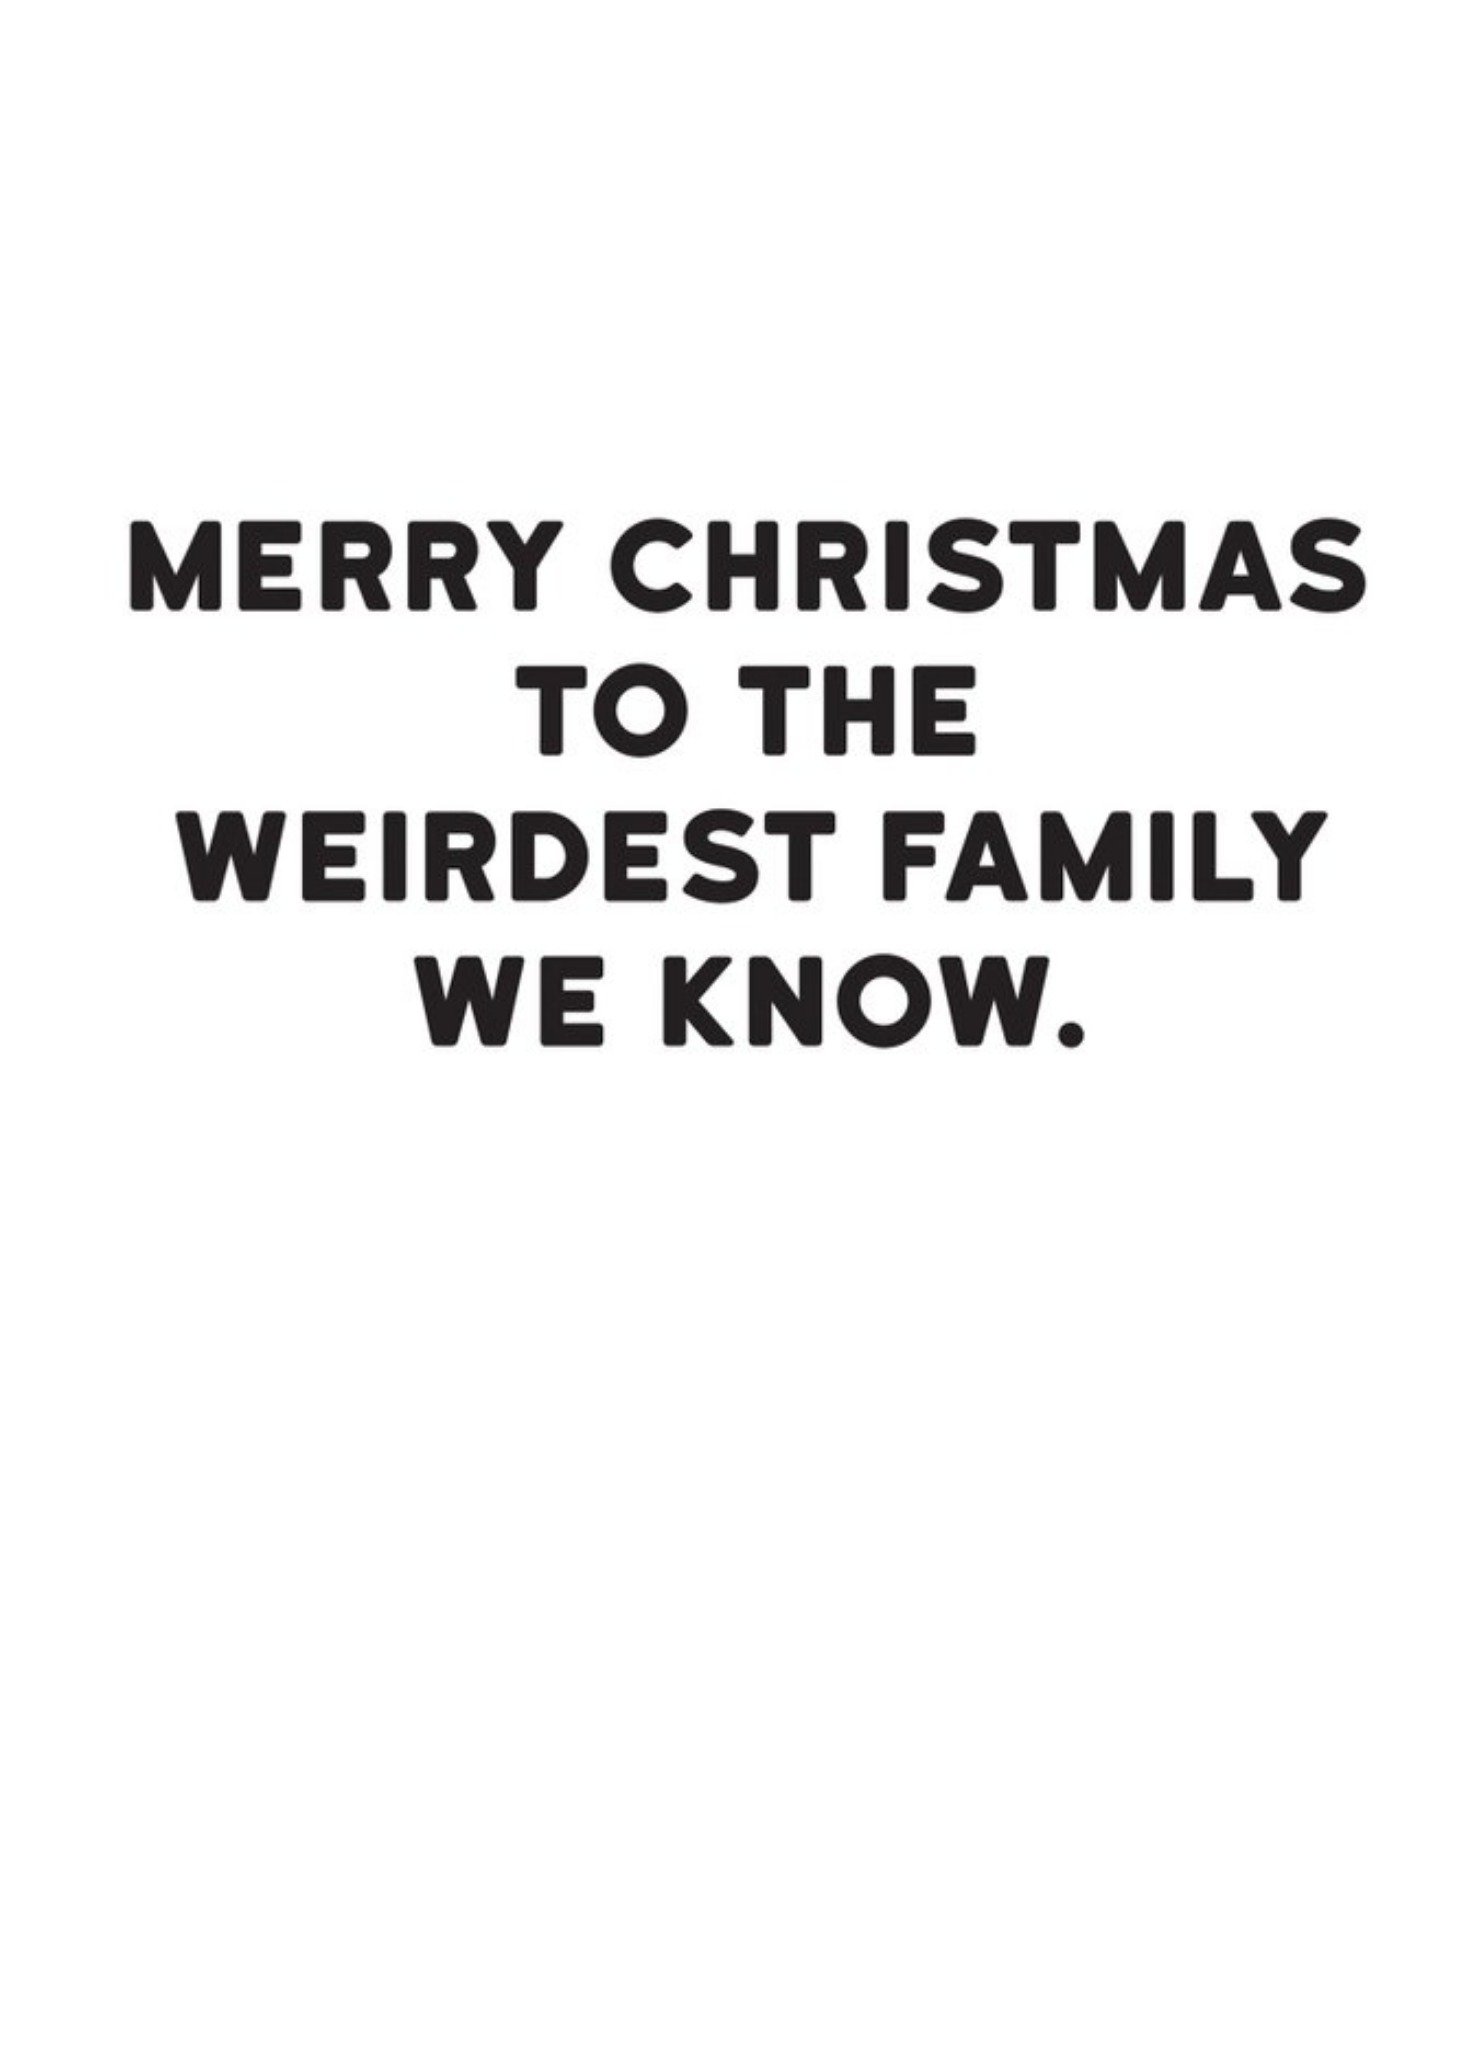 Moonpig Modern Funny Typographical The Weirdest Family We Know Christmas Card Ecard